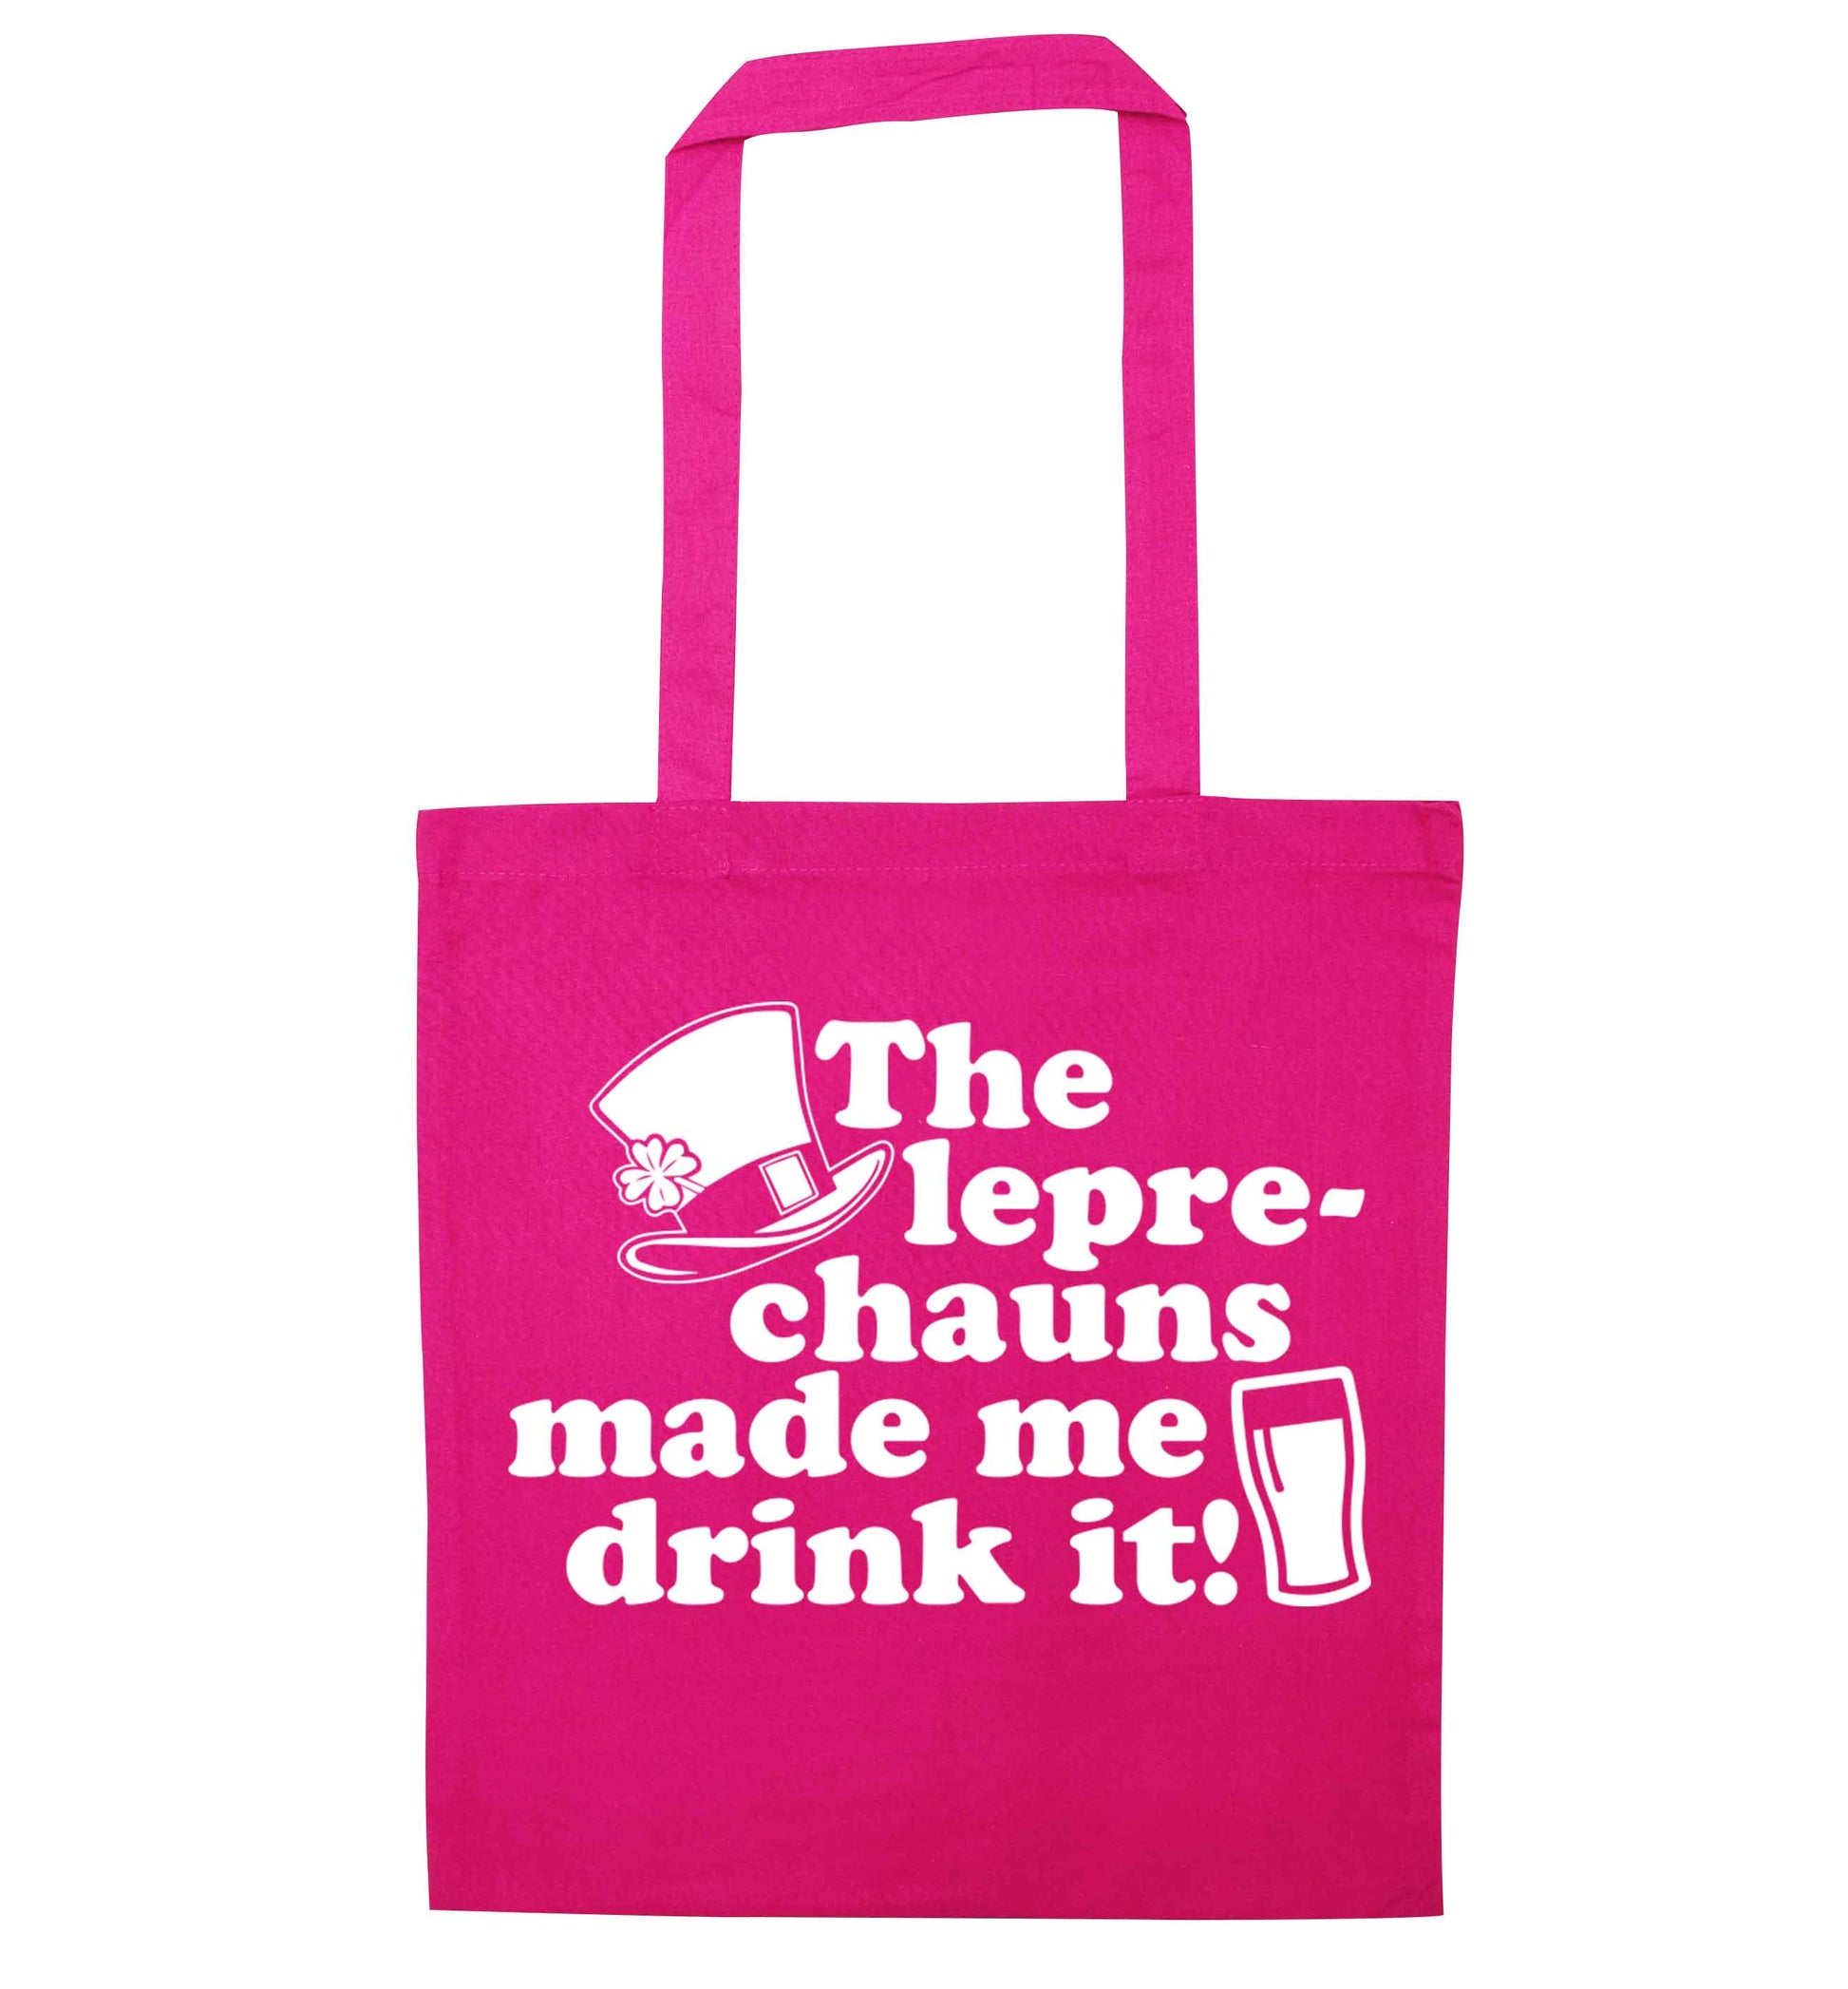 The leprechauns made me drink it pink tote bag